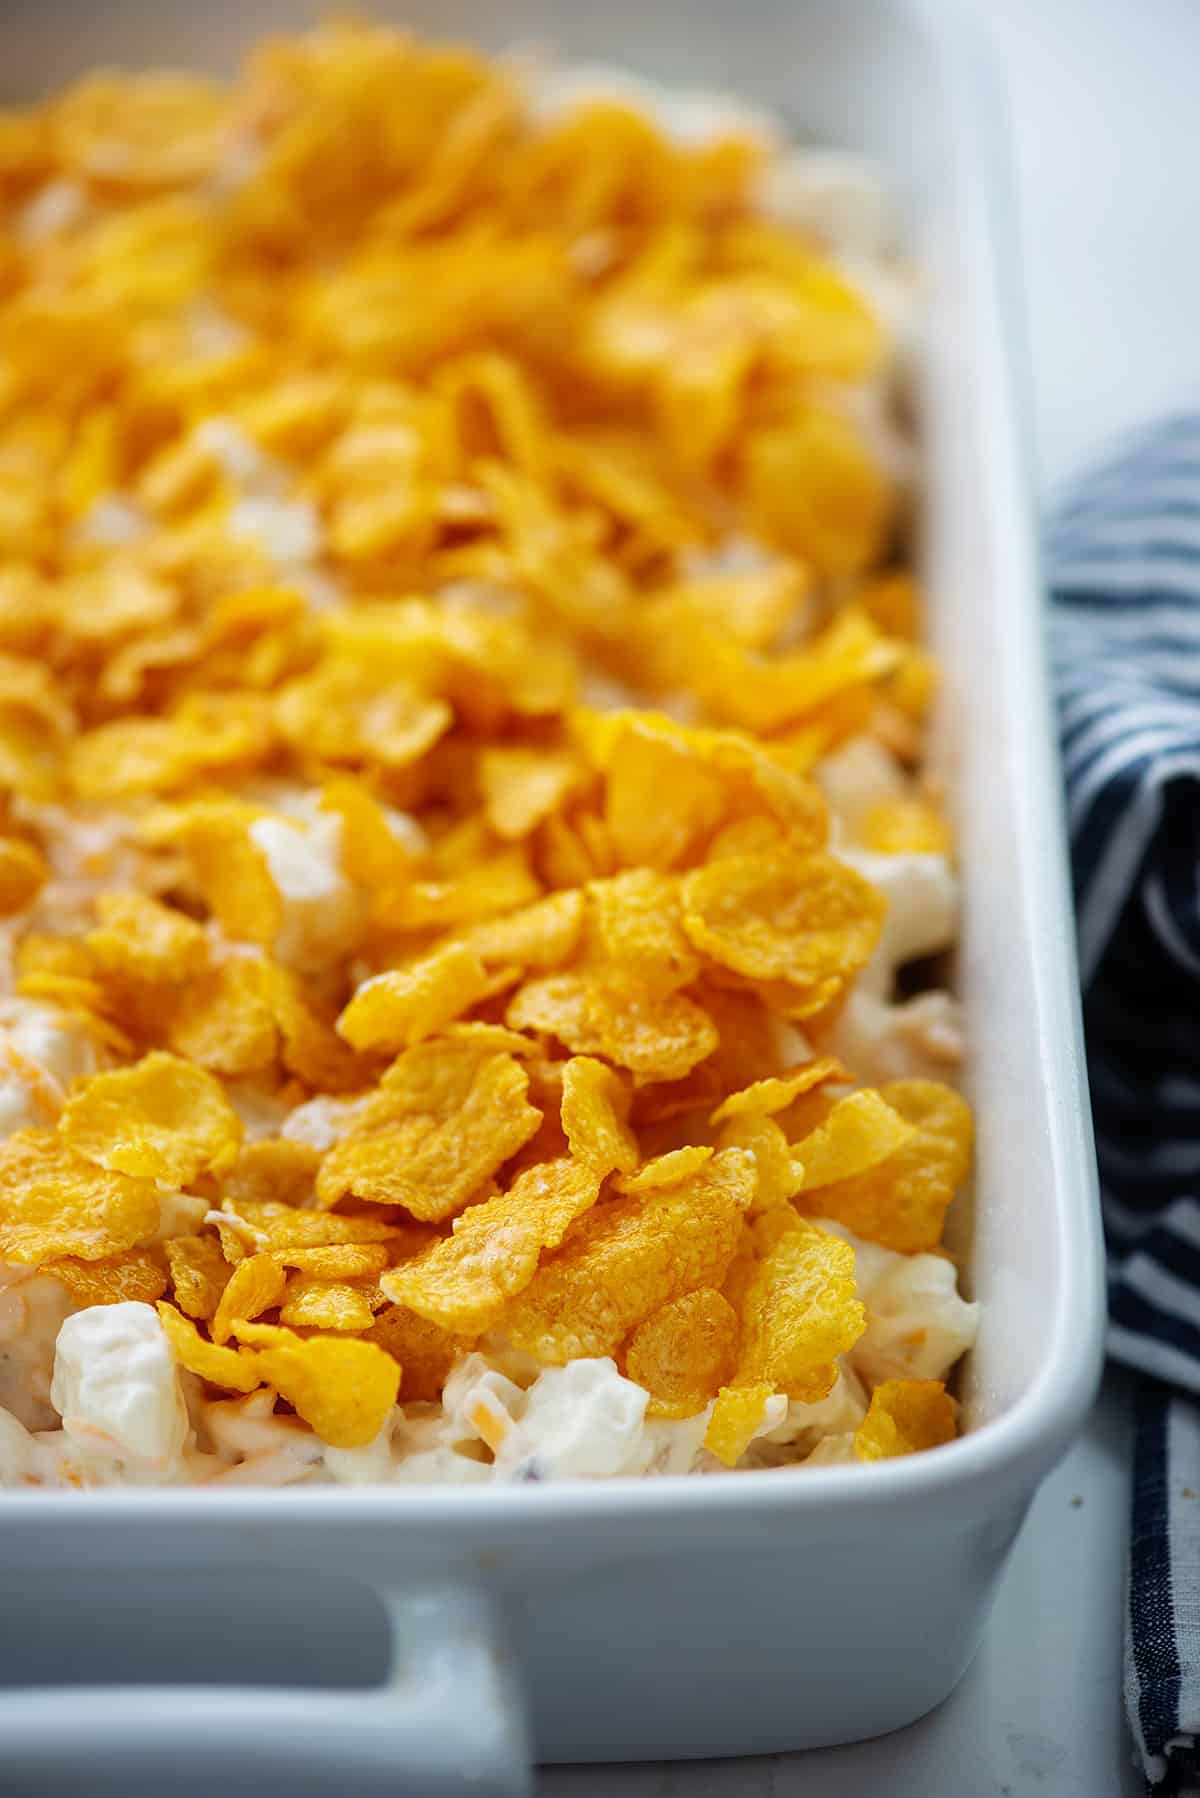 funeral potatoes recipe topped with cornflakes.